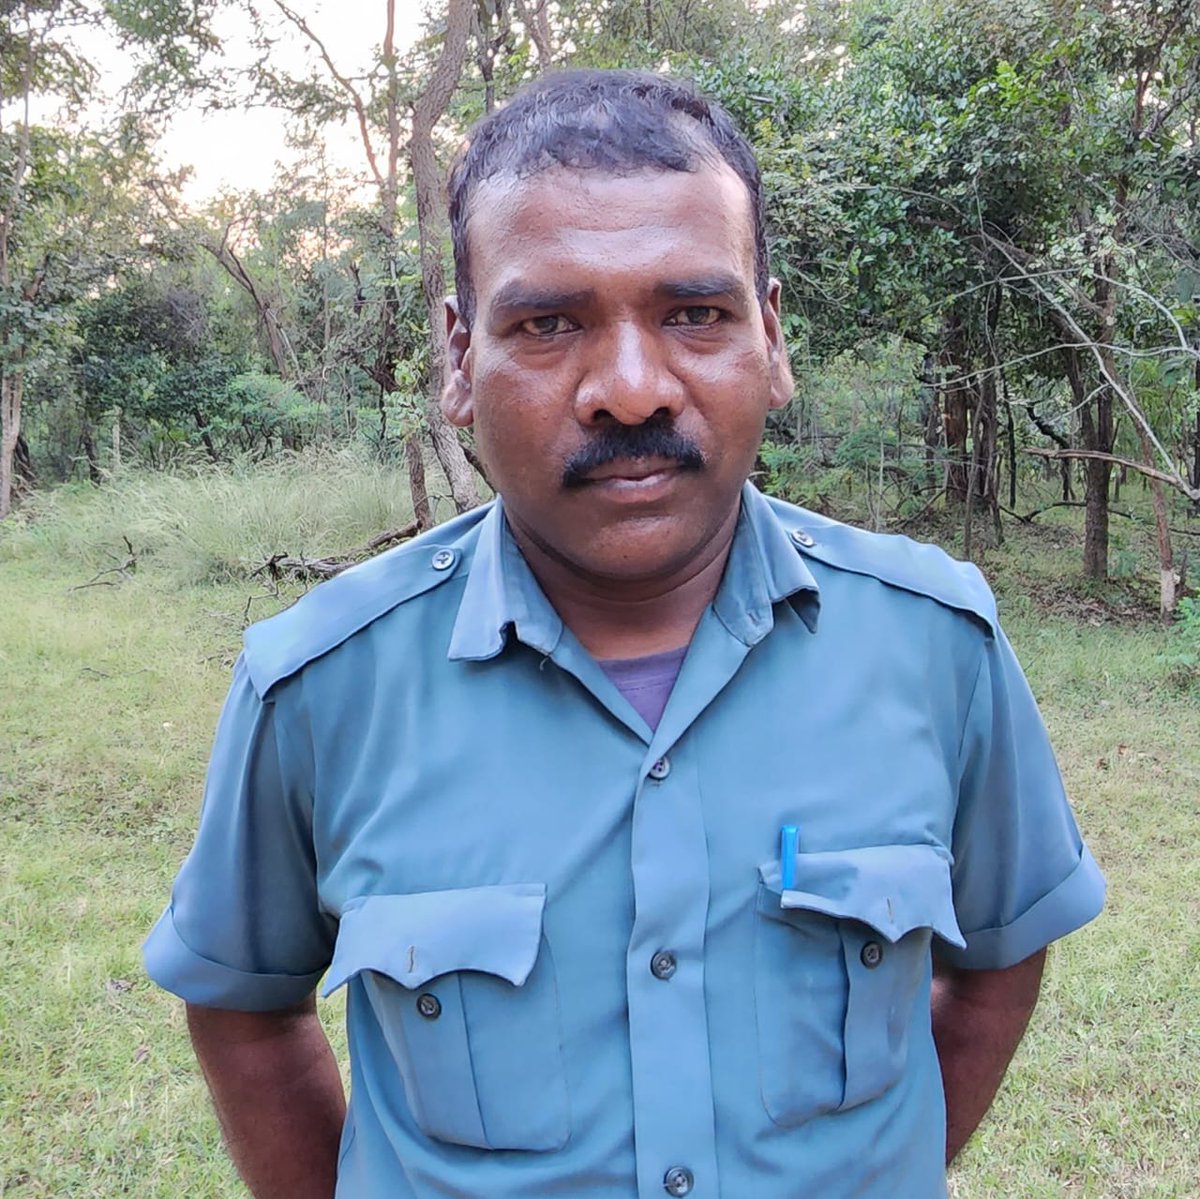 Meet Ghuran Sirsaam, part of team @ntca_india at Pench Tiger Reserve, the Mowgli land. He hardly had been to school but, due to his sheer determination, now an expert botanist. Point him a tree in Pench, and he immediately tells its botanical and local name and its uses as well.